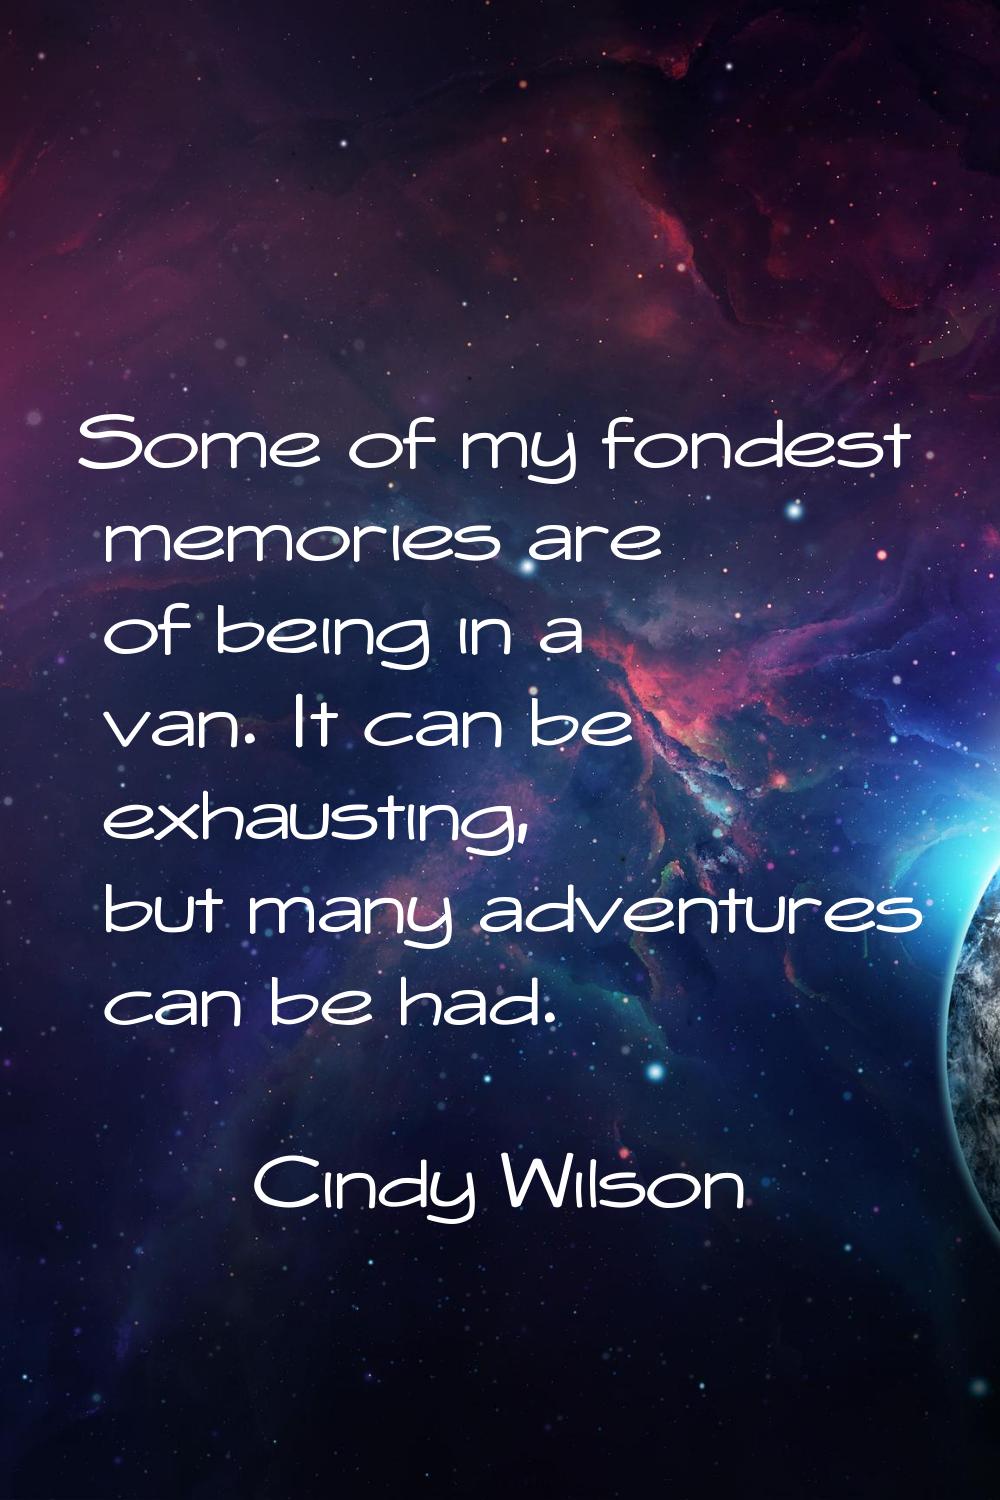 Some of my fondest memories are of being in a van. It can be exhausting, but many adventures can be